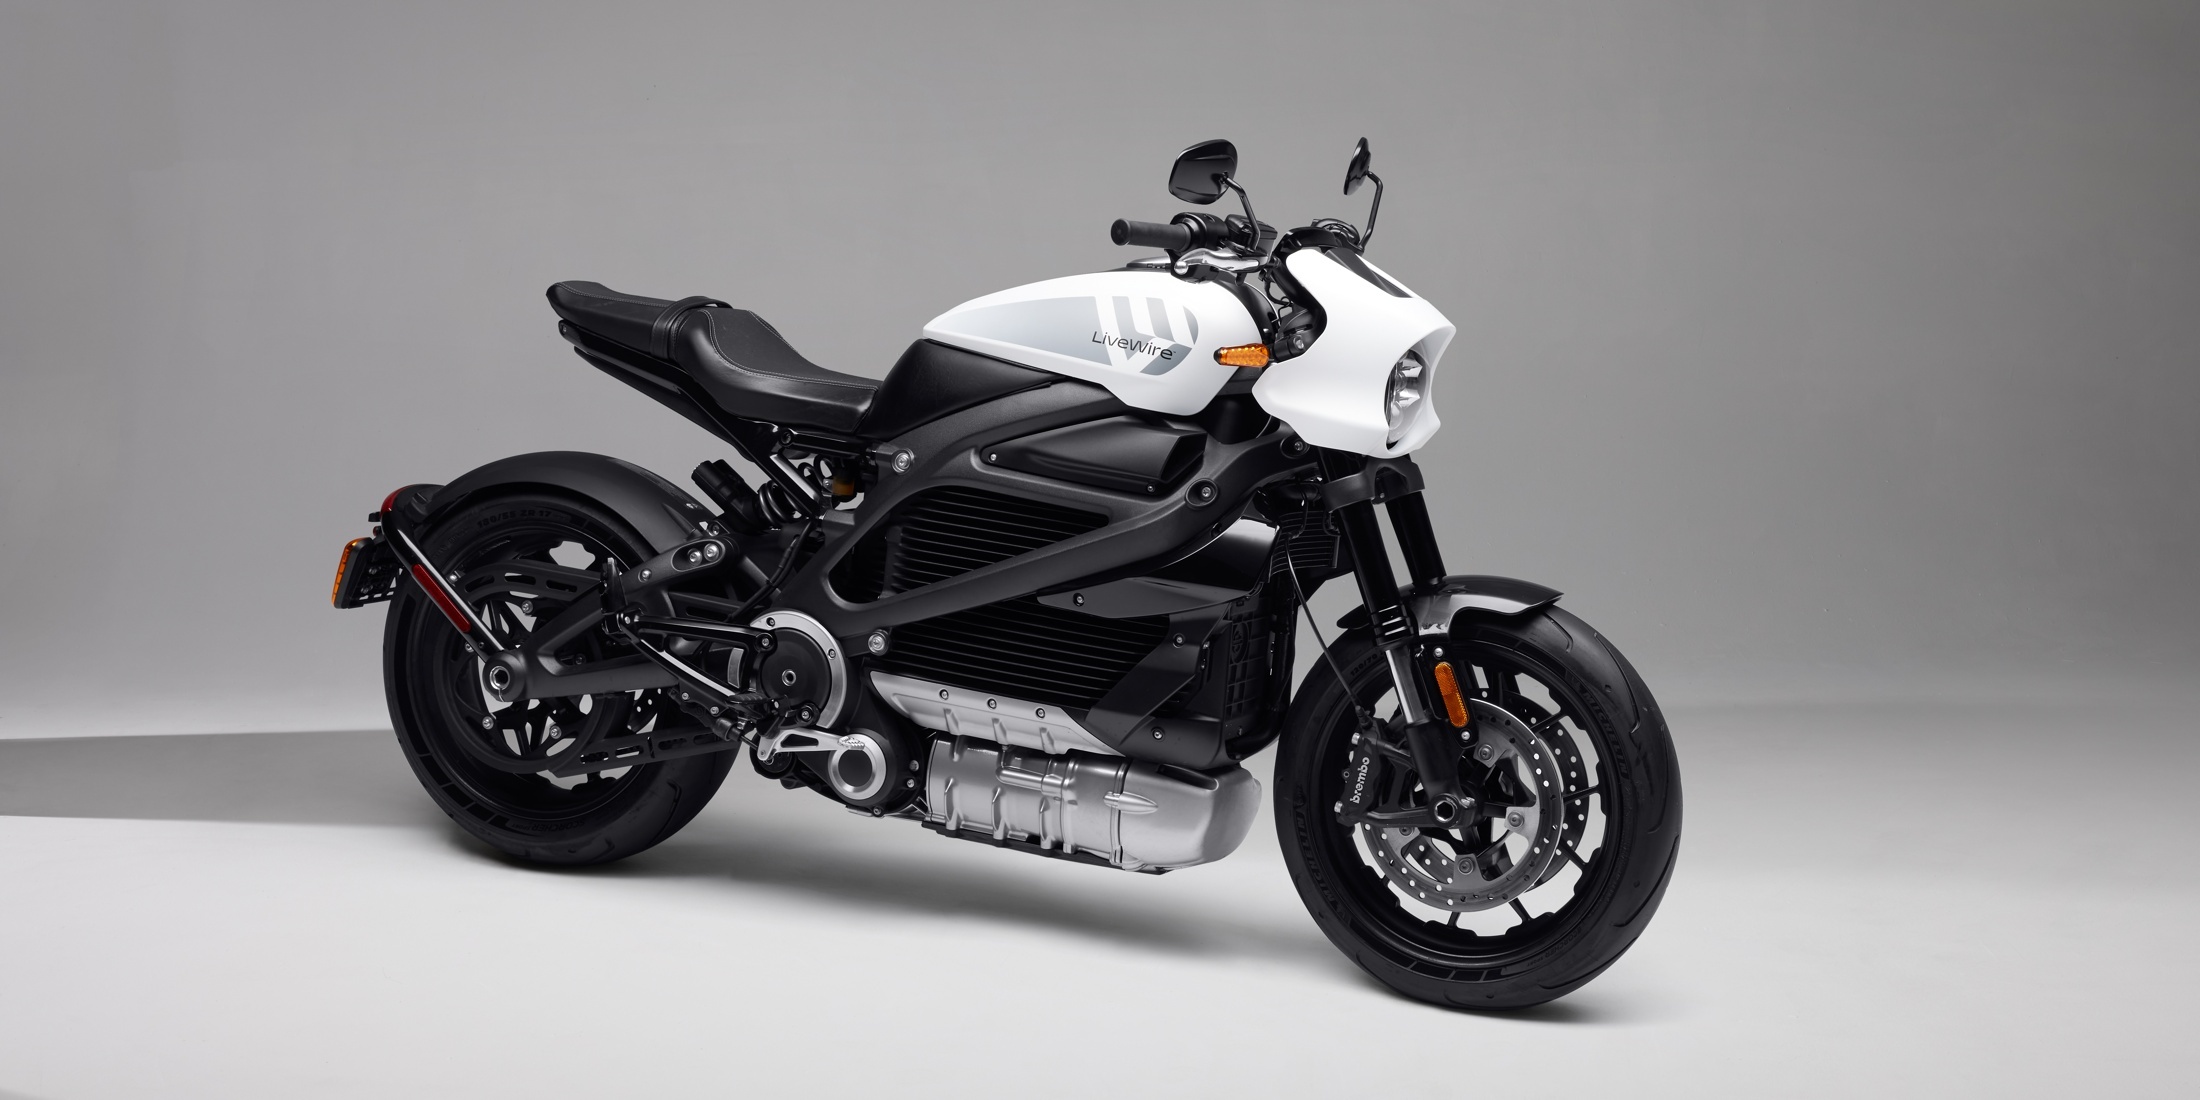 Harley-Davidson Livewire, Relaunches Livewire One, Lower Price, 2200x1100 Dual Screen Desktop